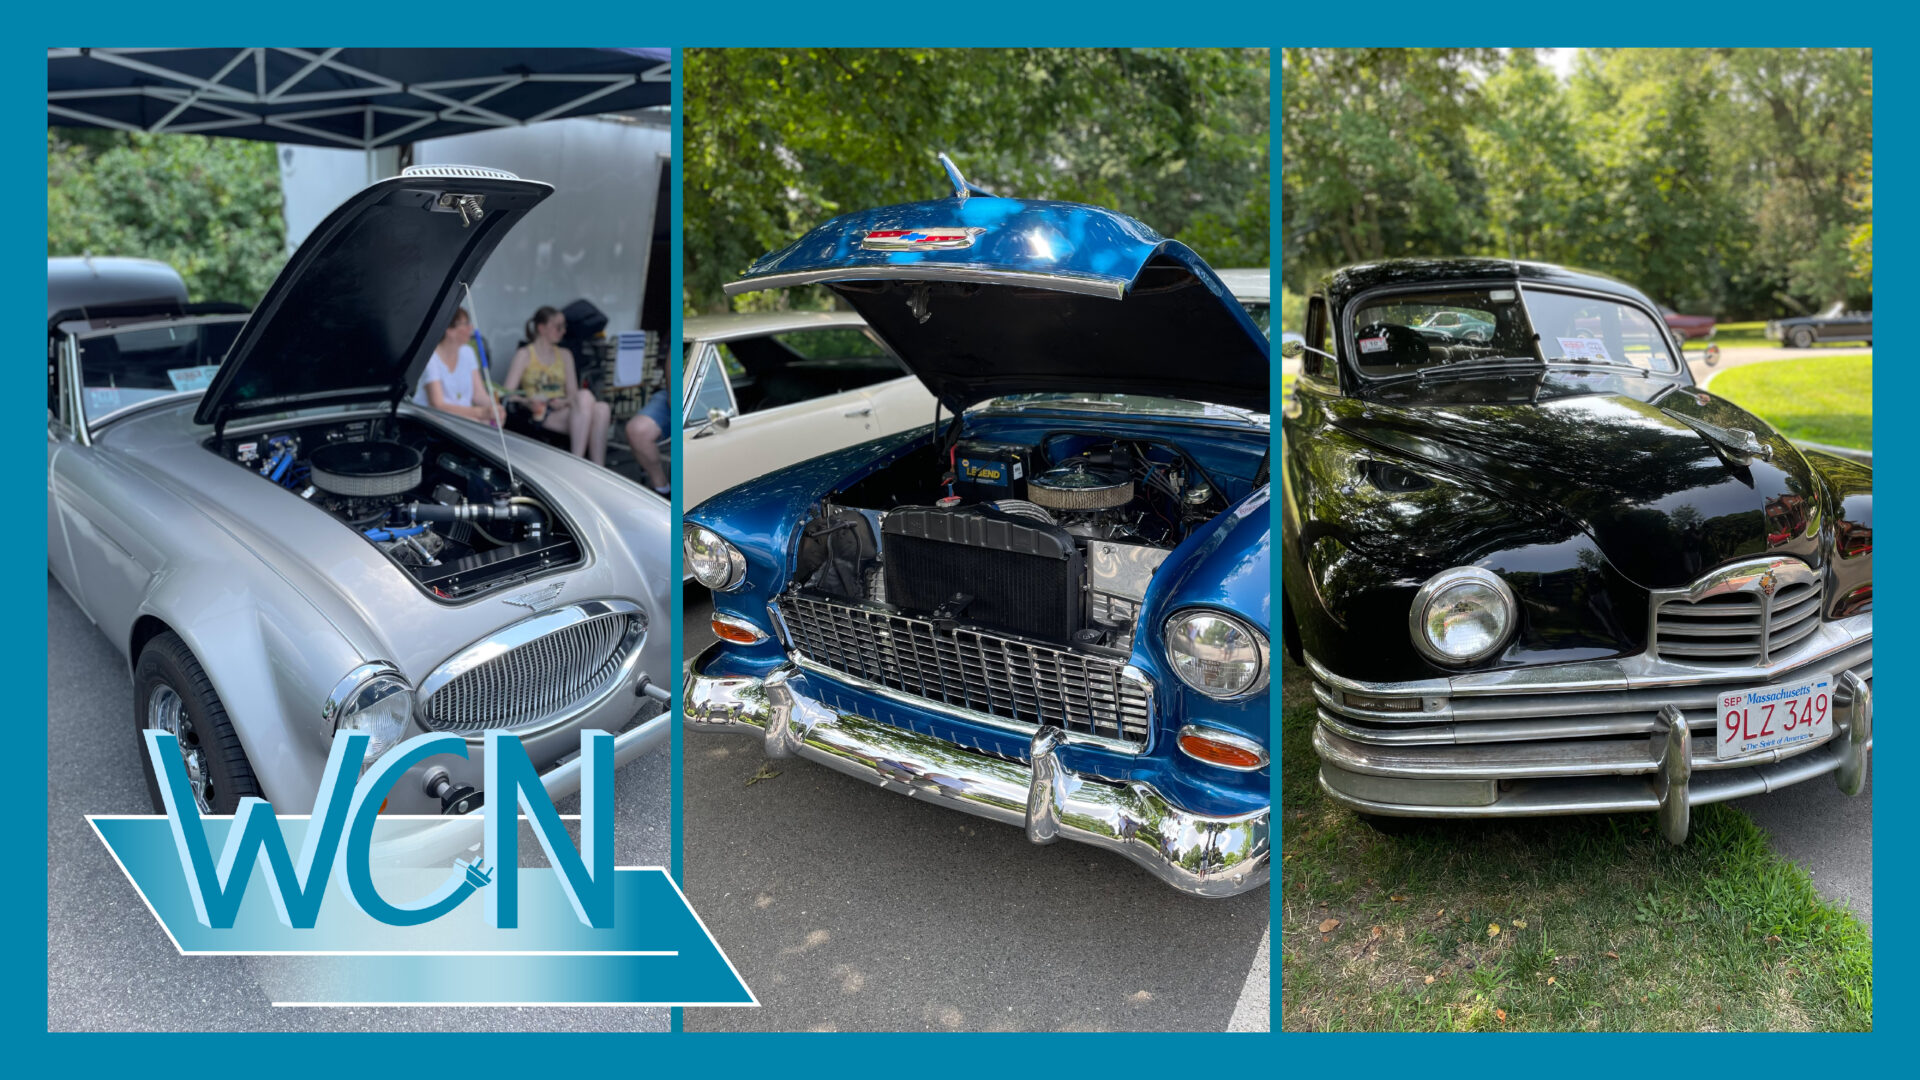 Vintage Automobiles on Display During Watertown’s First Classic Car Show